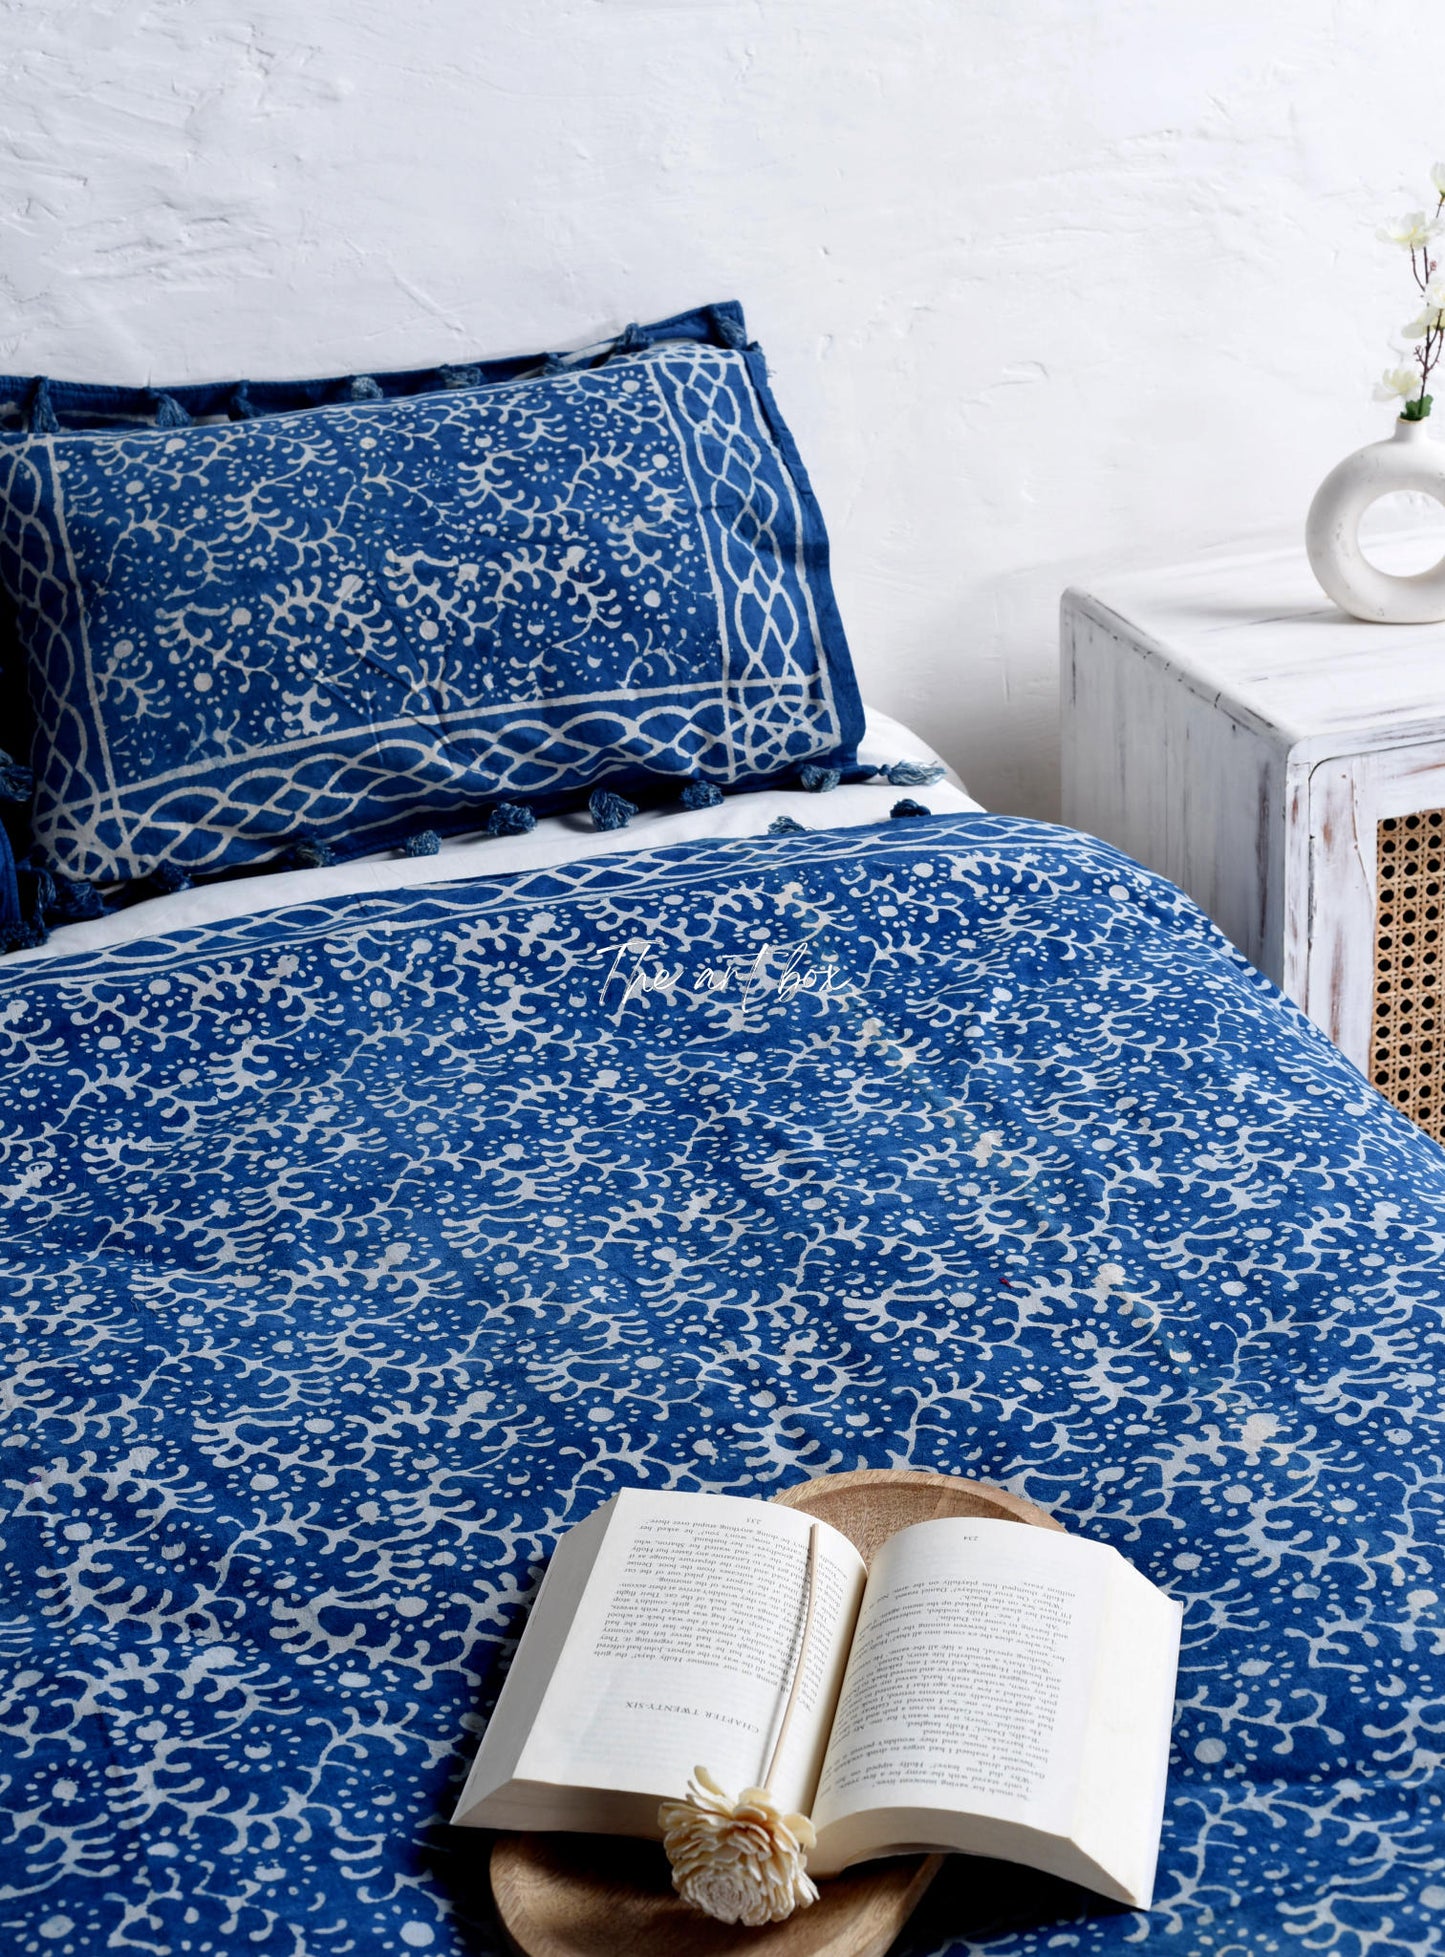 Ethnic Floral Block Printed Duvet Cover and Pillow Set